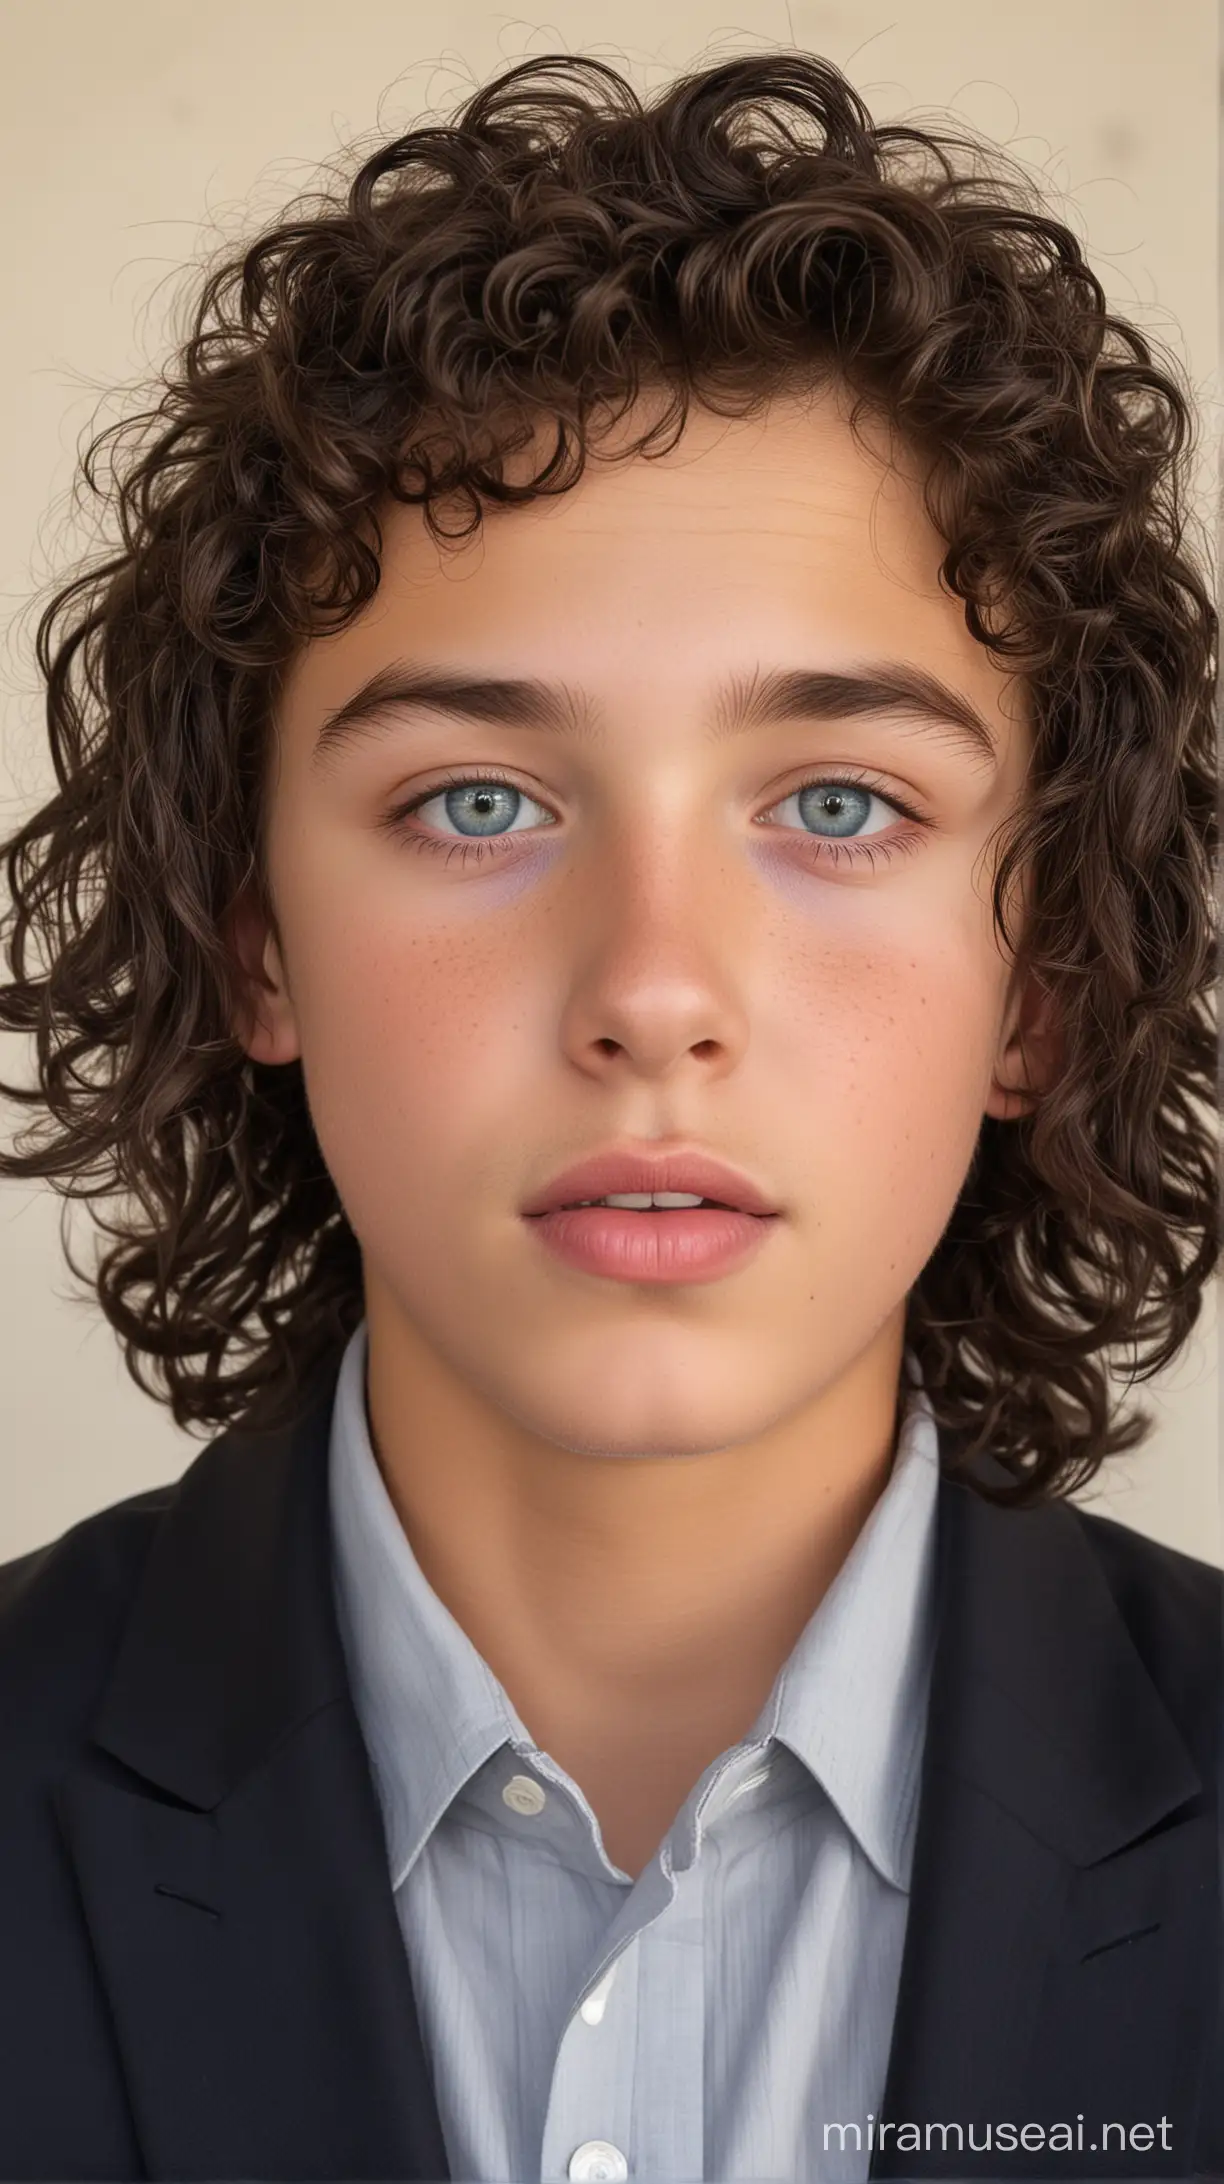 A 13 year old white with a little tan boy with small blue eyes, wide lips, small nose, weak jawline and long black curly backbrushed hair wearing a blazer